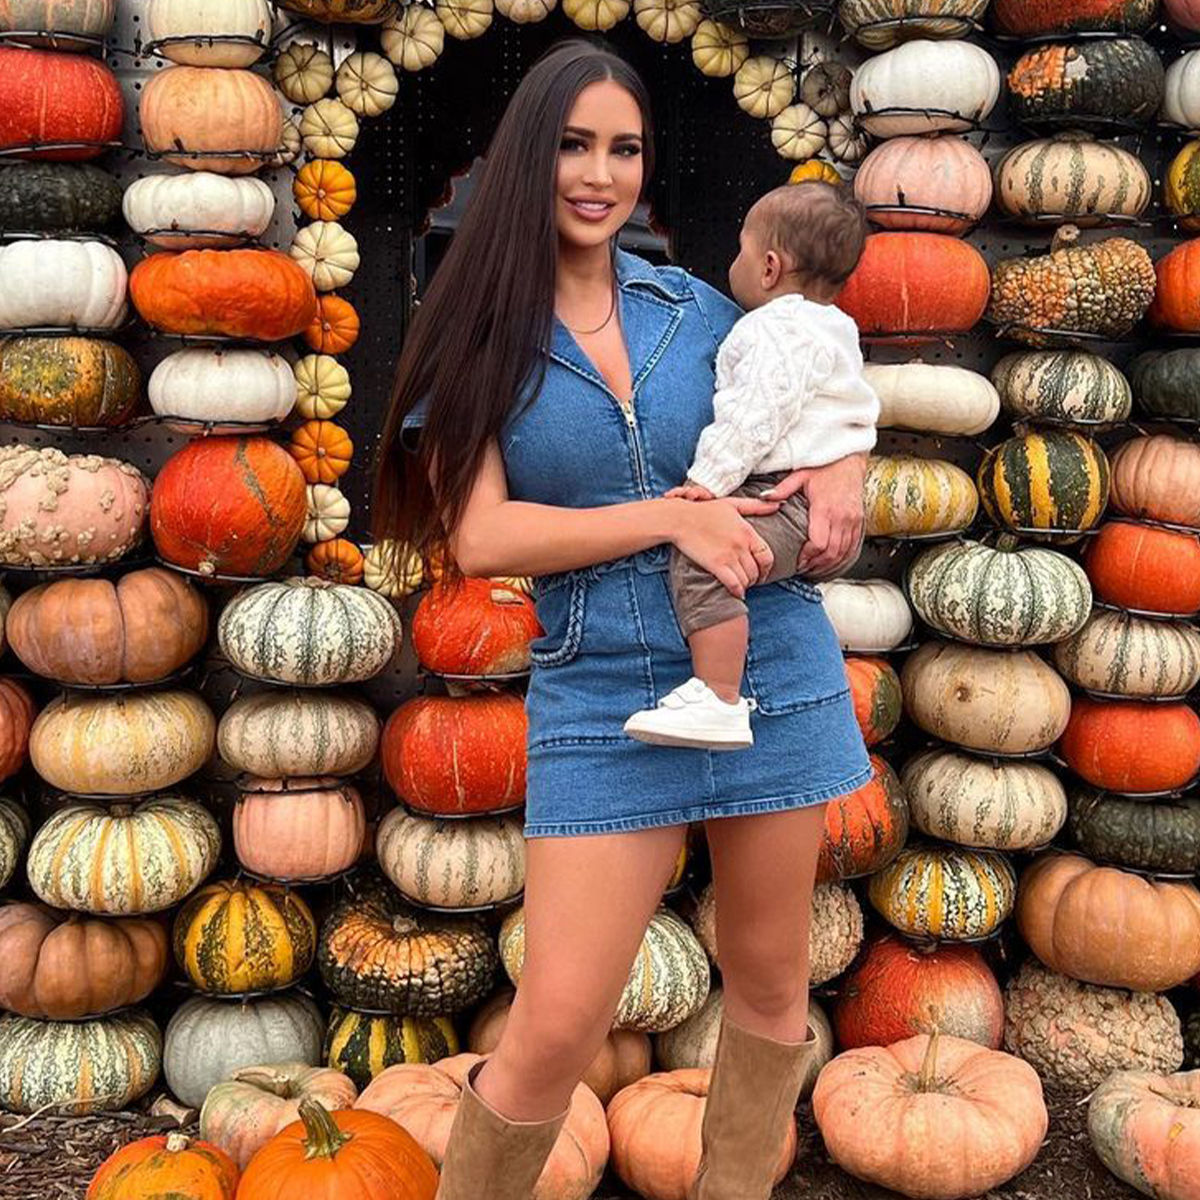 Proof Maralee Nichols & Tristan Thompson’s Son Theo Is Growing Up Fast